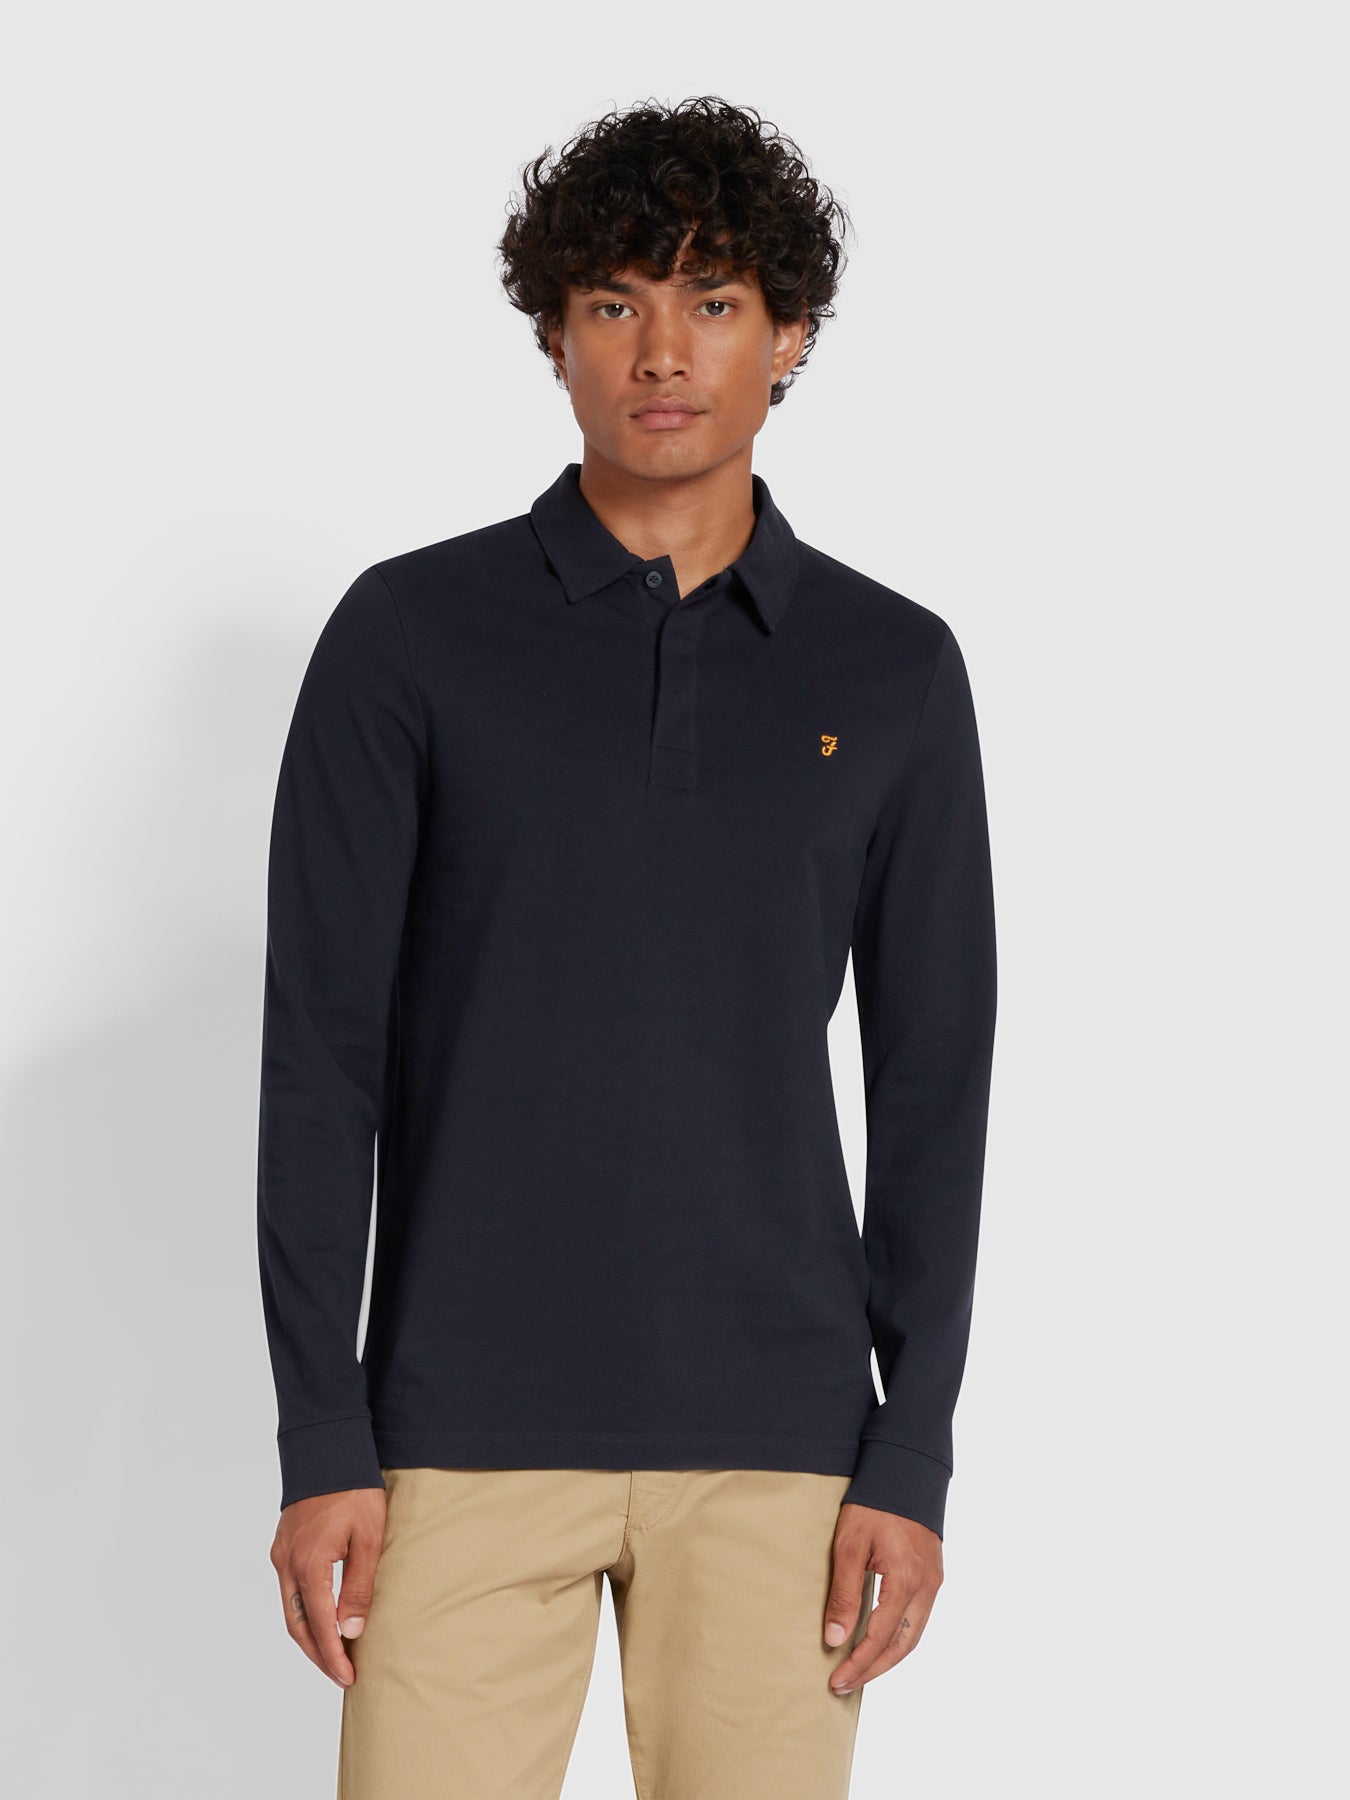 View Haslam Slim Fit Long Sleeve Organic Cotton Polo Shirt In True Navy information